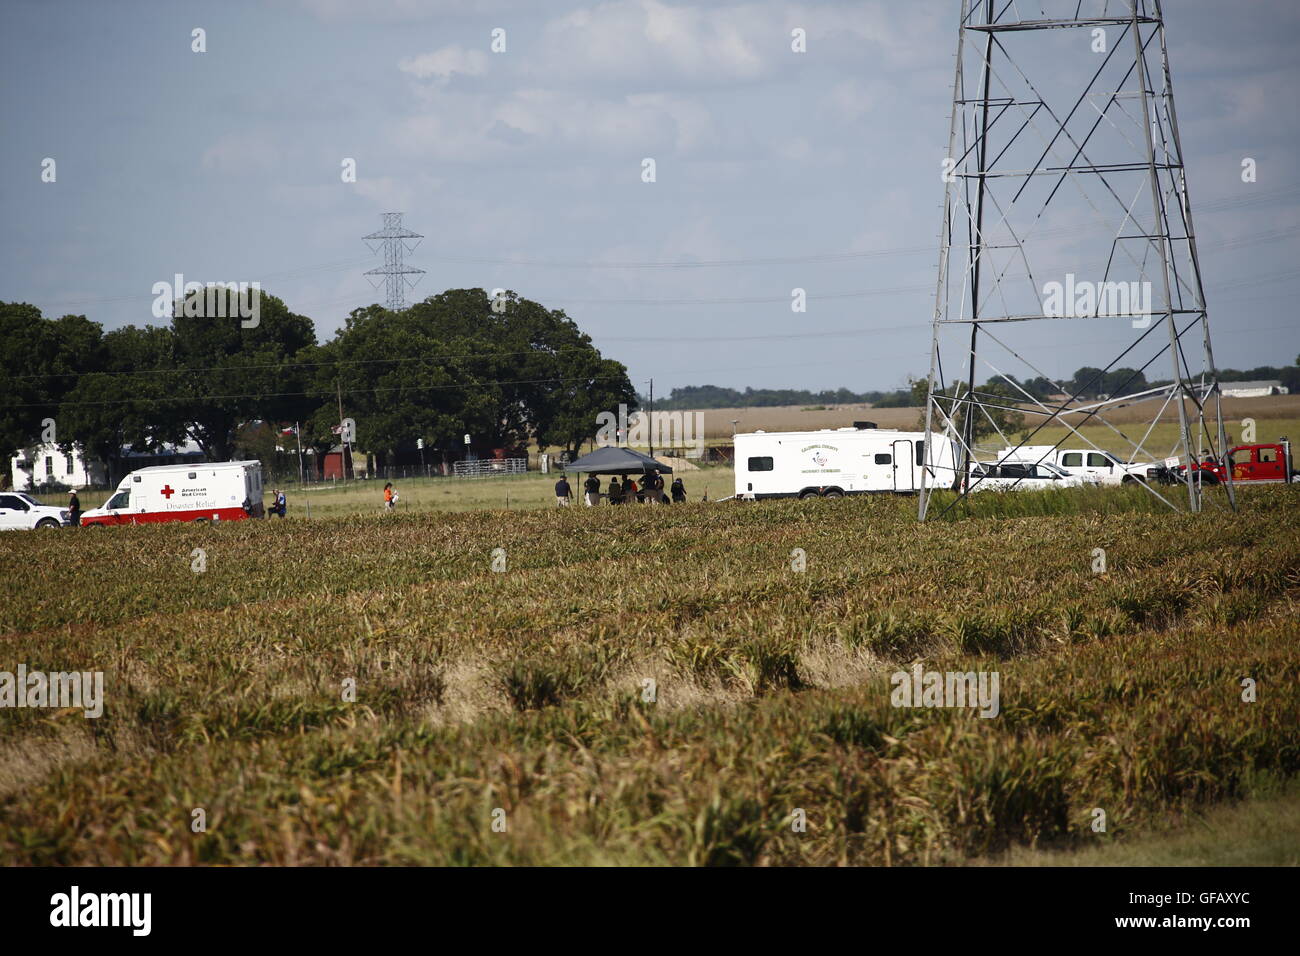 (160731) -- LOCKHART, July 31, 2016 (Xinhua) -- Investigators work at the site of a balloon crash accident near Lockhart, a city in the central part of the U.S. state of Texas, July 30, 2016. U.S. Texas Department of PUBLIC Safety has confirmed that 16 people were killed on Saturday morning after a hot air balloon caught on fire and crashed near Lockhart. The accident occurred shortly after 7:40 a.m. local time on Saturday near Lockhart, when the hot air balloon with at least 16 people on board crashed into a pasture, the Federal Aviation Administration (FAA) said in a statement on Saturday. ( Stock Photo